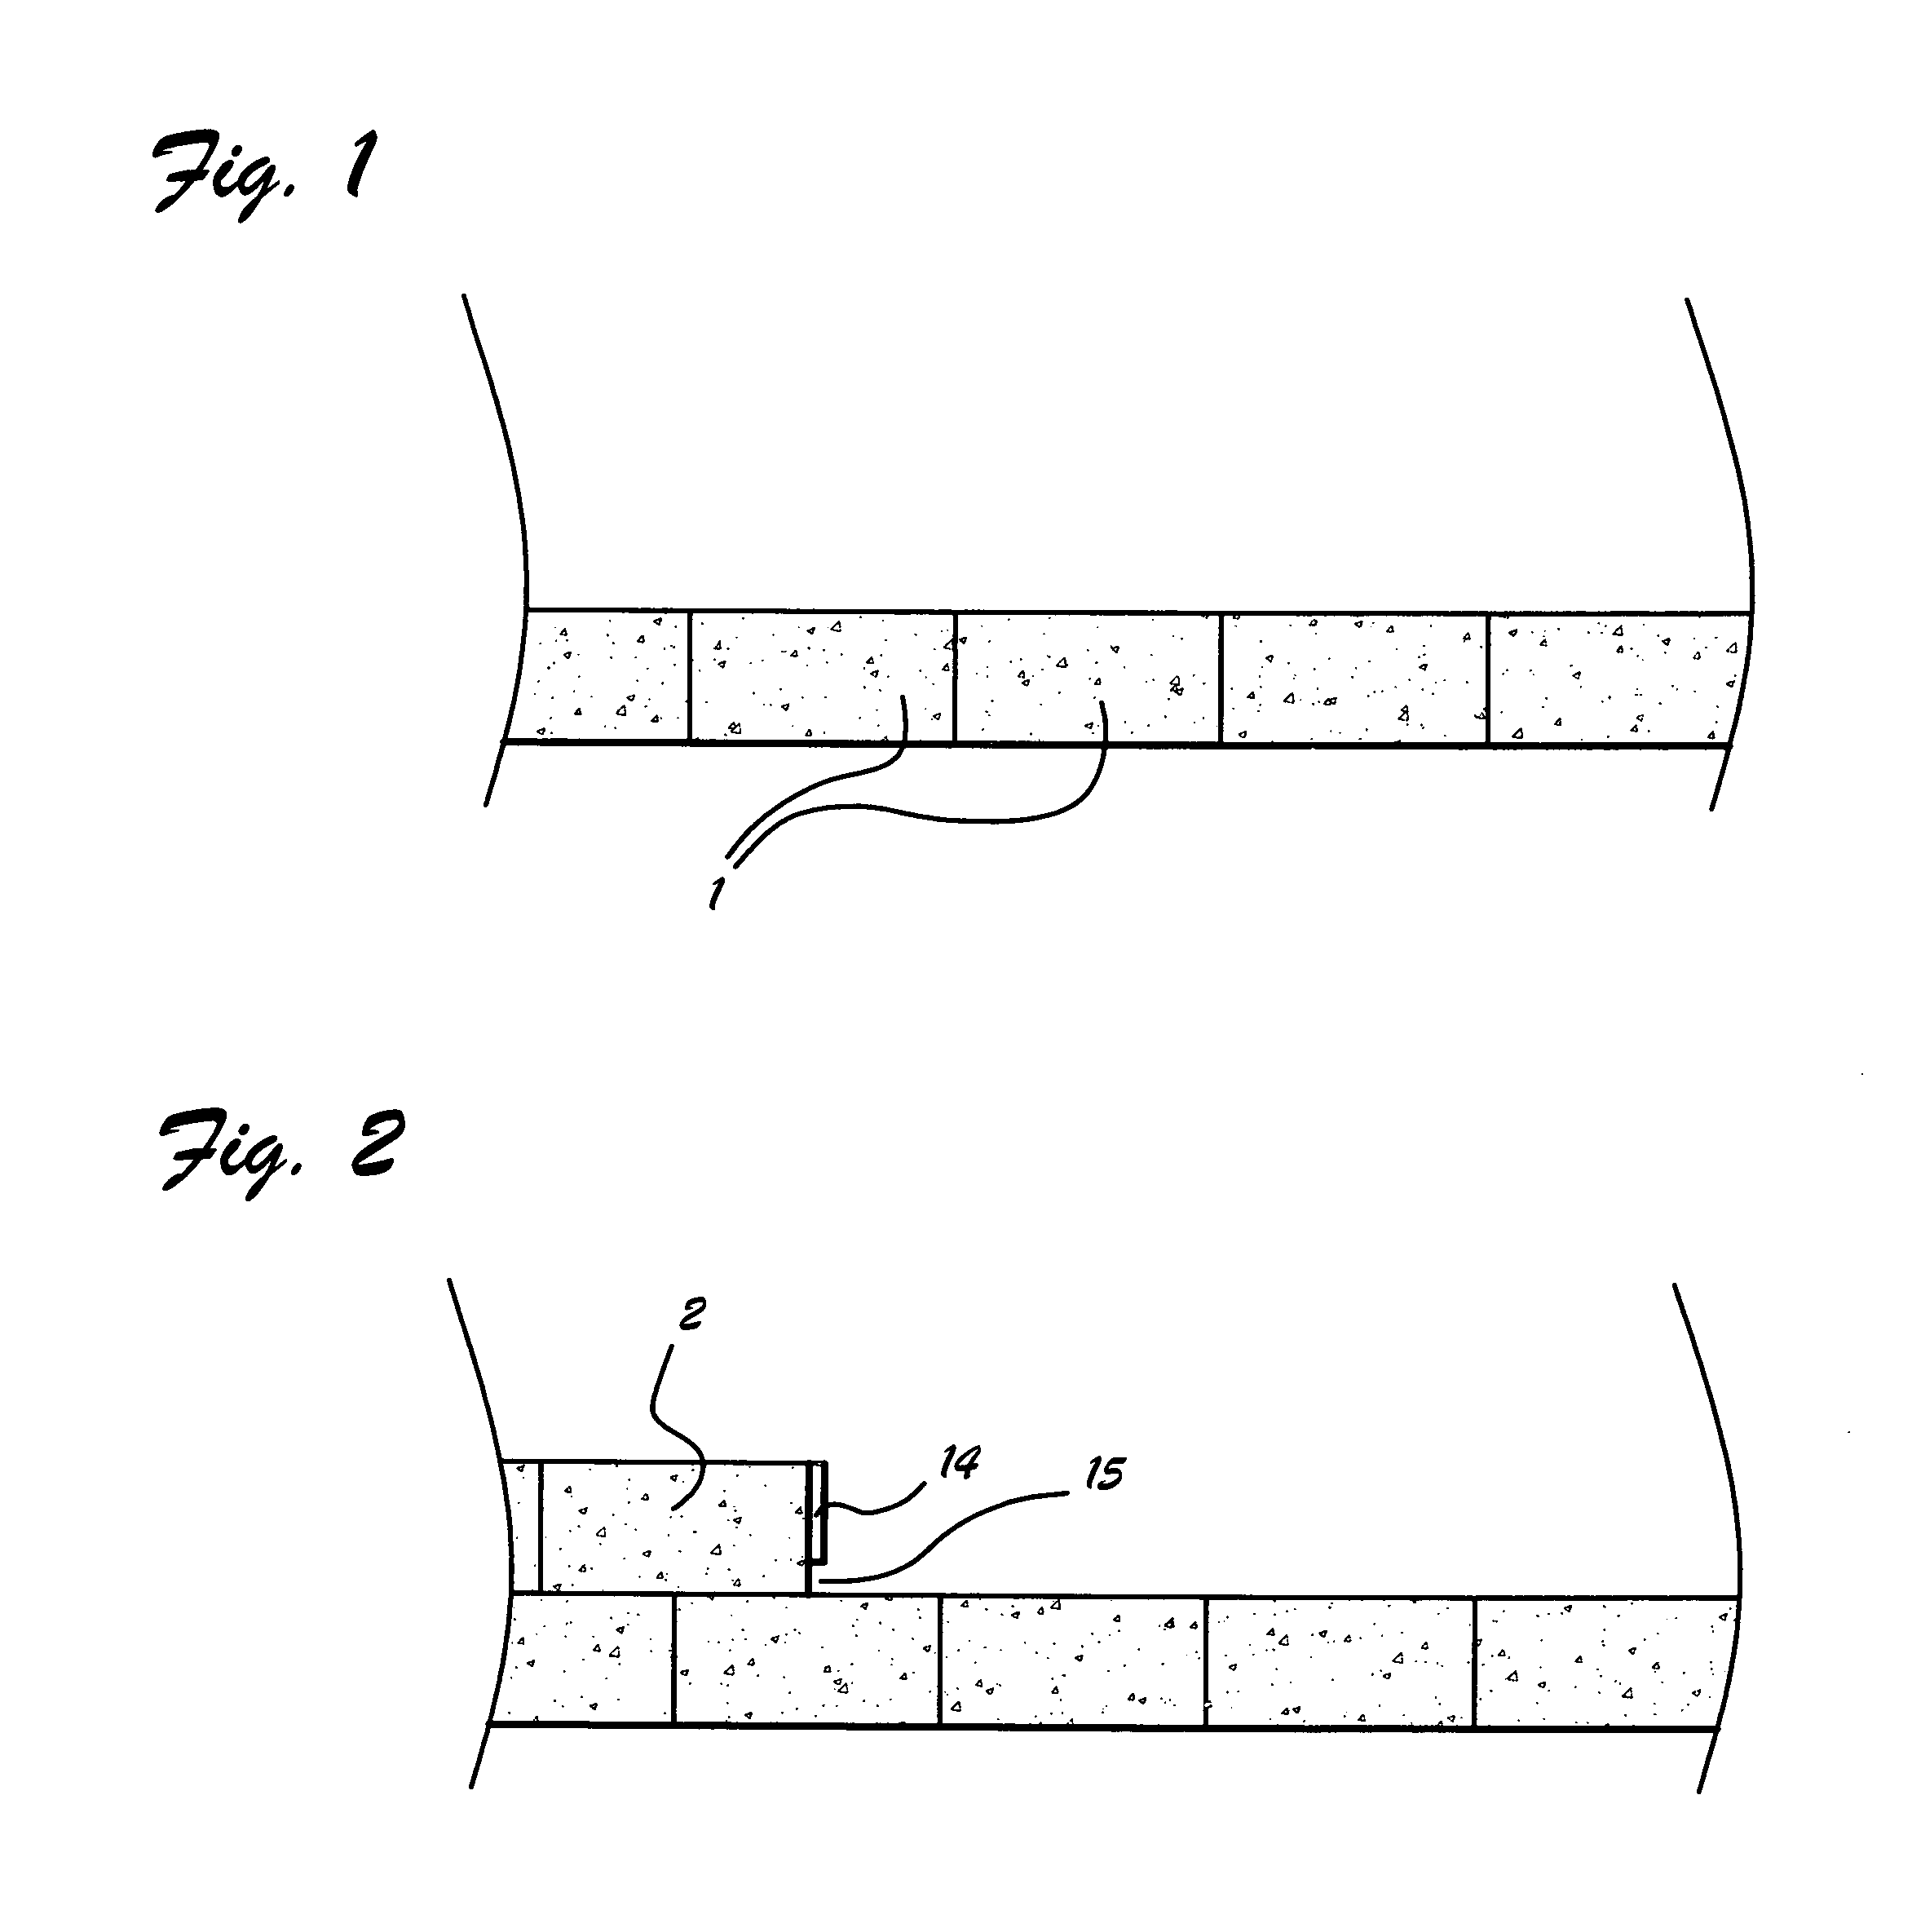 Apparatus and method for framing windows and doors